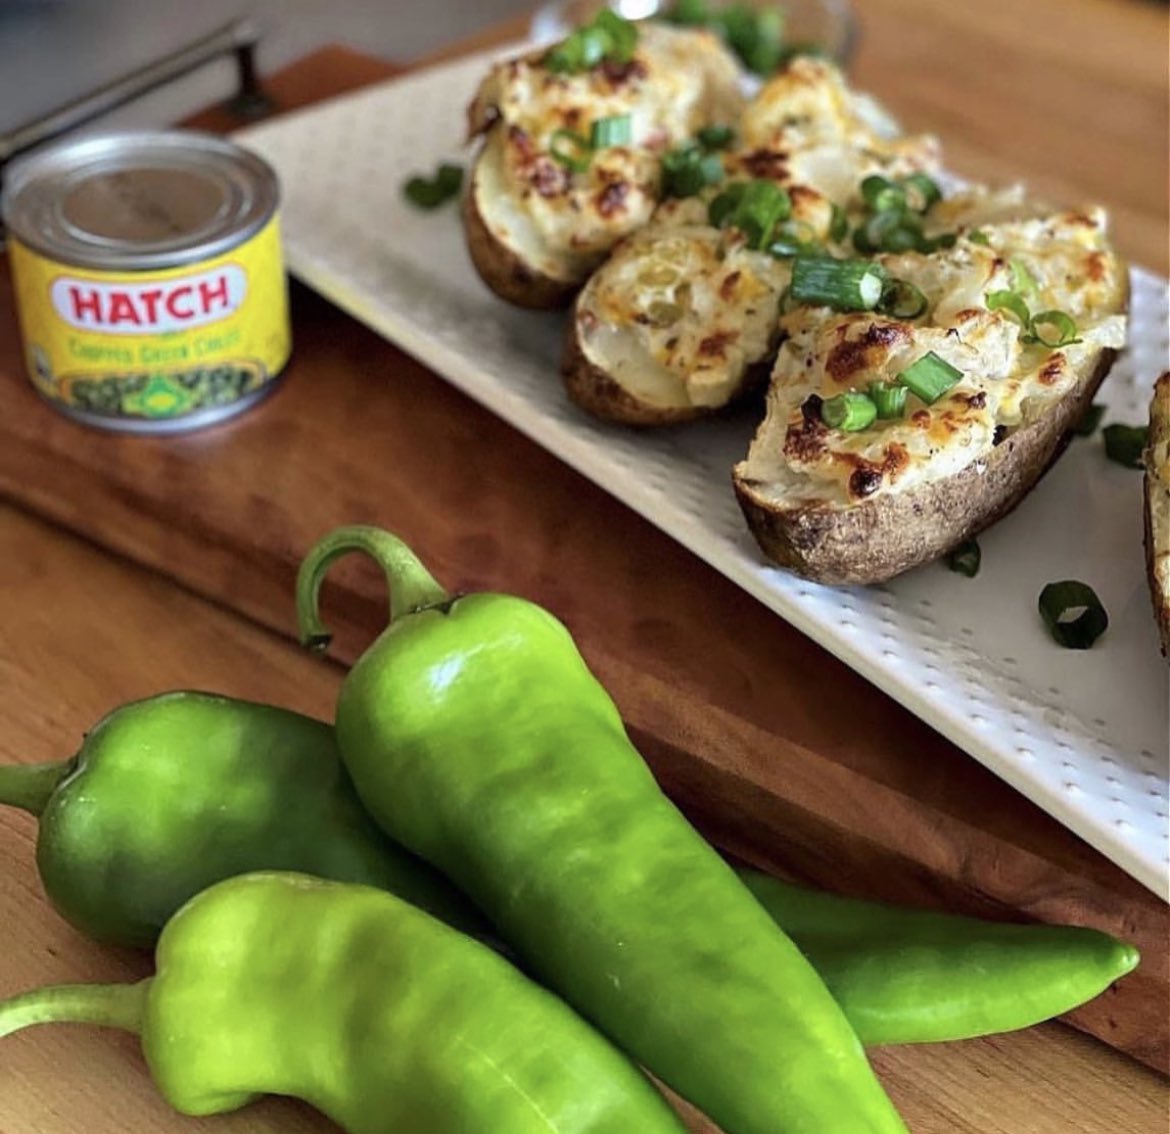 SIDE DISH ALERT: HATCH Select® Green Chile Twice Baked Potatoes

#ceceliasgoodstuff #hatchgreenchile #hatchchileco 
 #NewMexico #SantaFe #Albuquerque #HatchNewMexico
#OnlyInNewMexico 
#NMTrue
#GlutenFree #Grilling #PartyIdeas #Sprouts #Albertsons #WalMart #Amazon